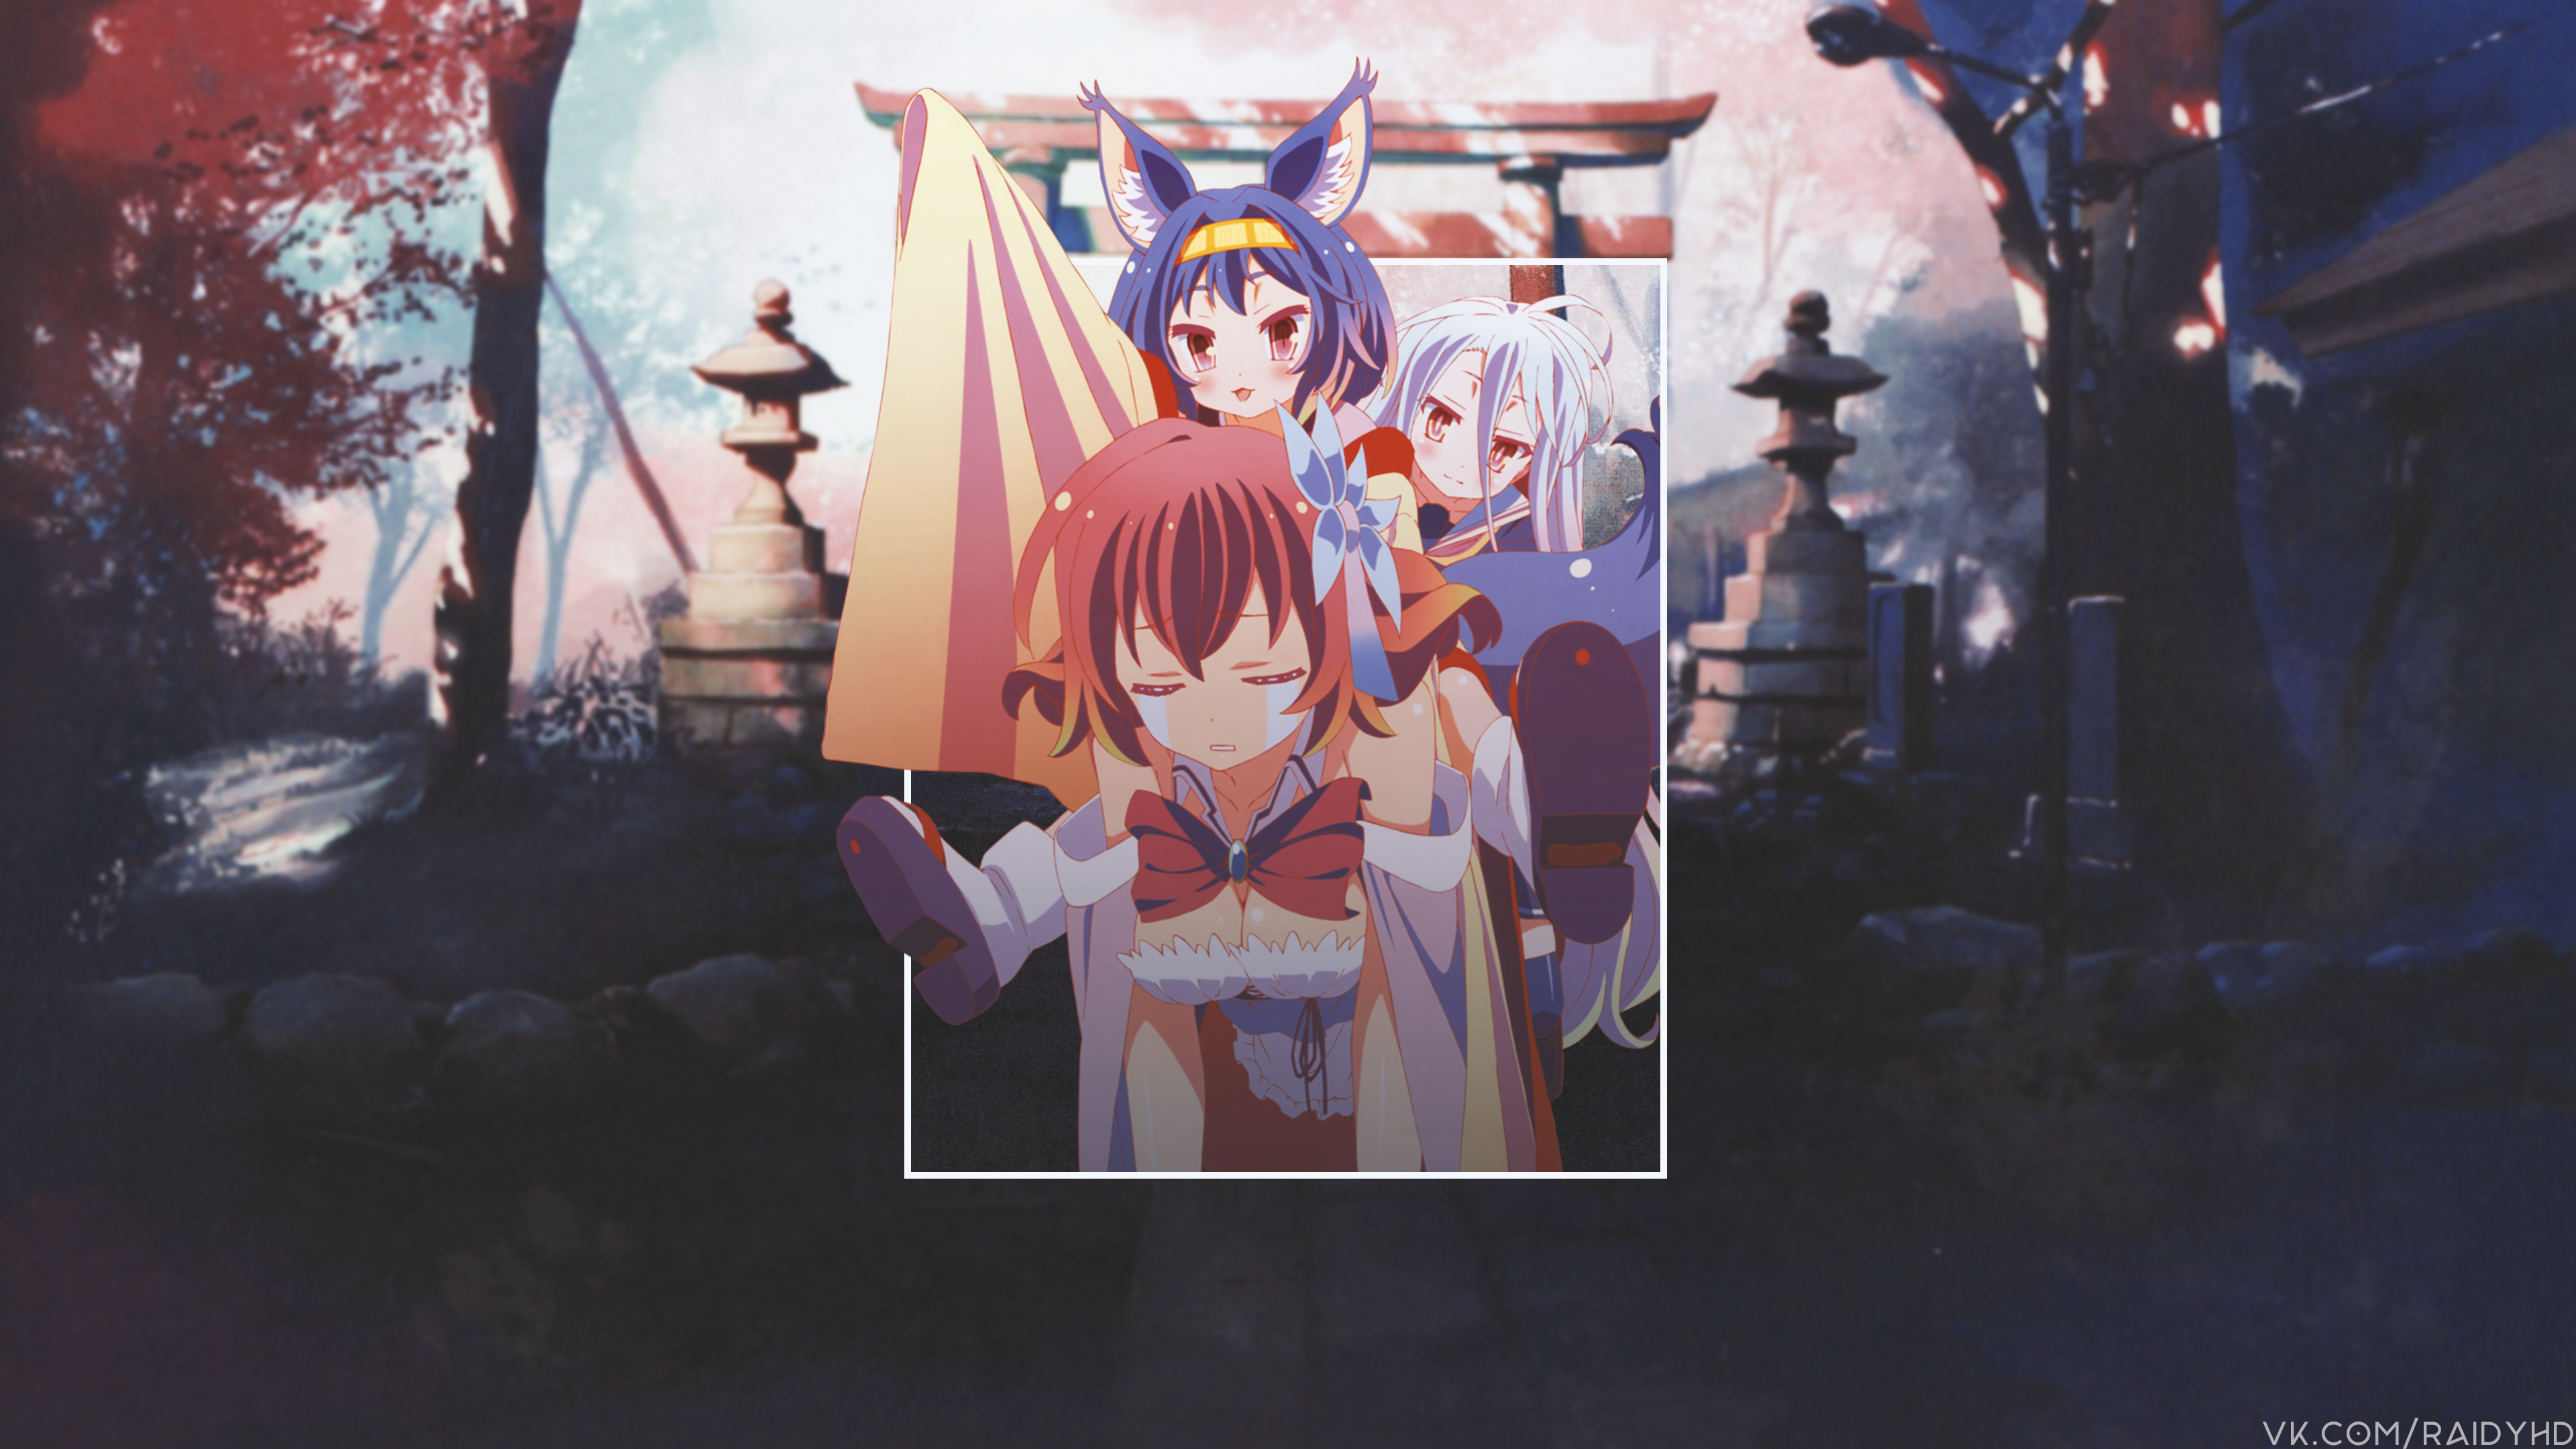 Anime 3840x2160 anime anime girls picture-in-picture No Game No Life